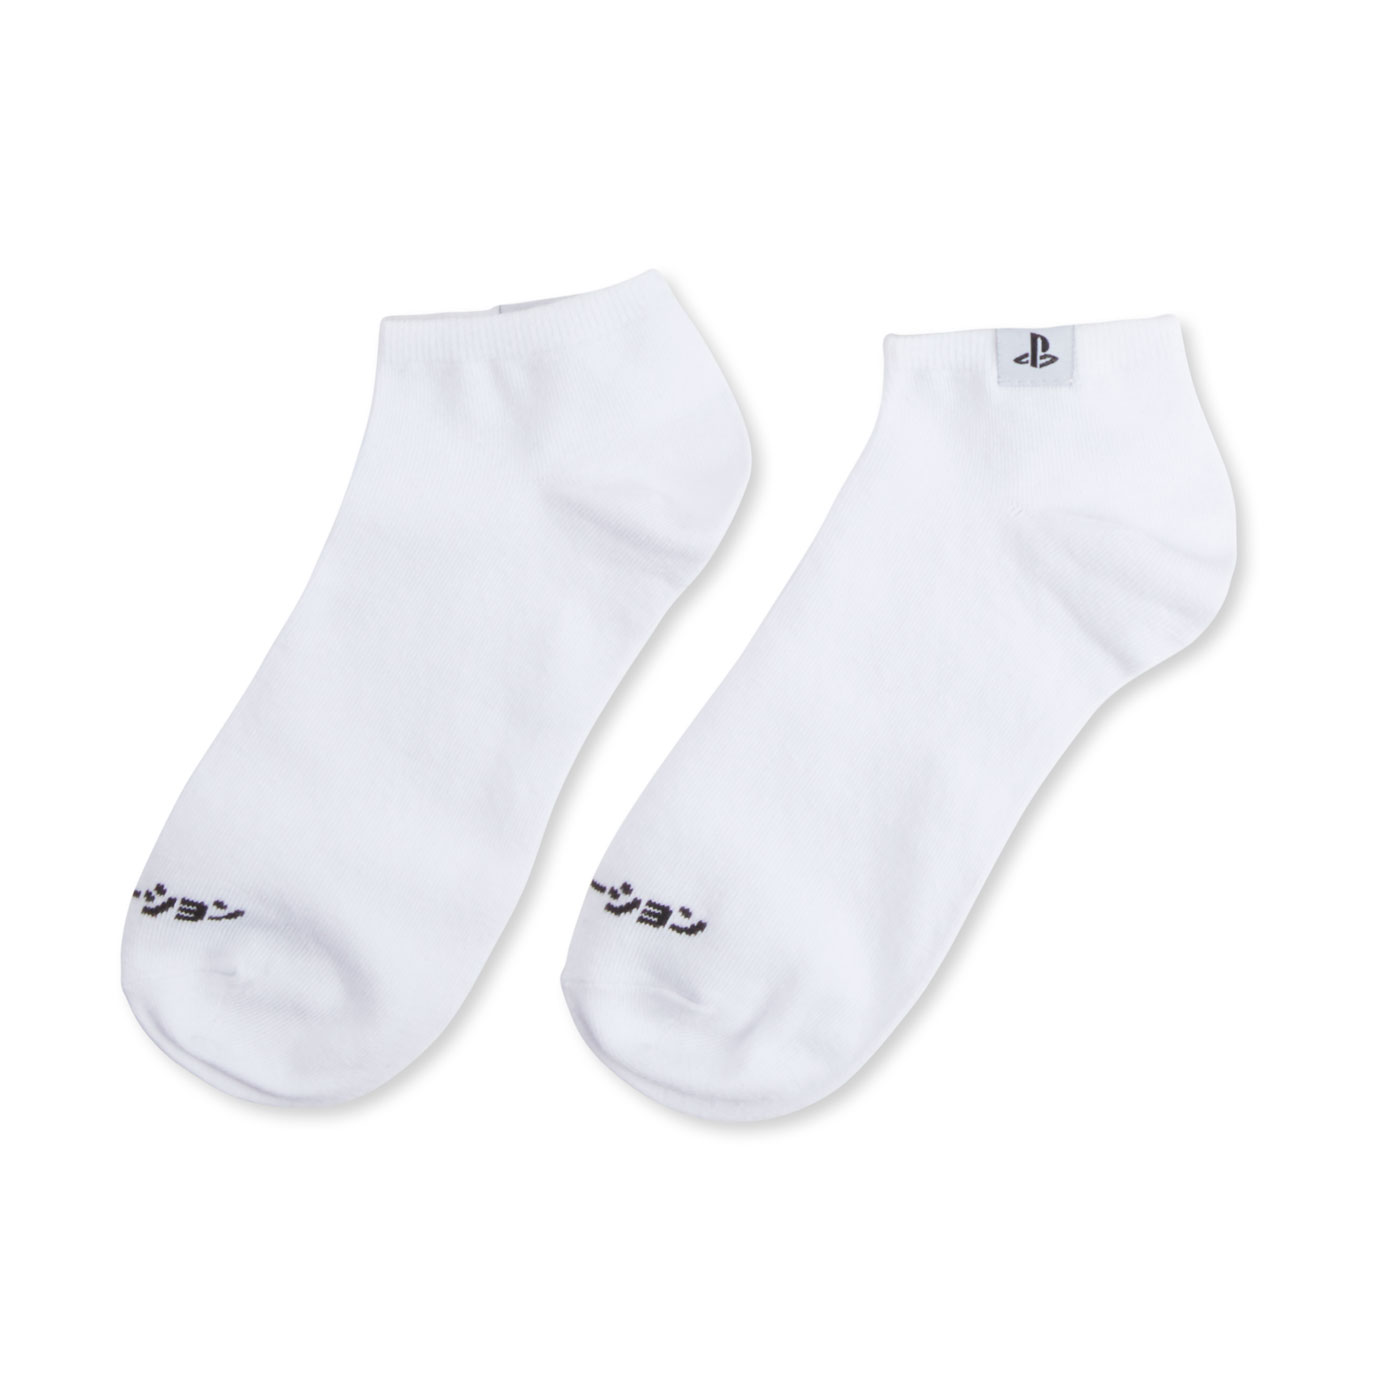 PlayStation™ Ankle Socks (Pack of 5) | PlayStation Gear